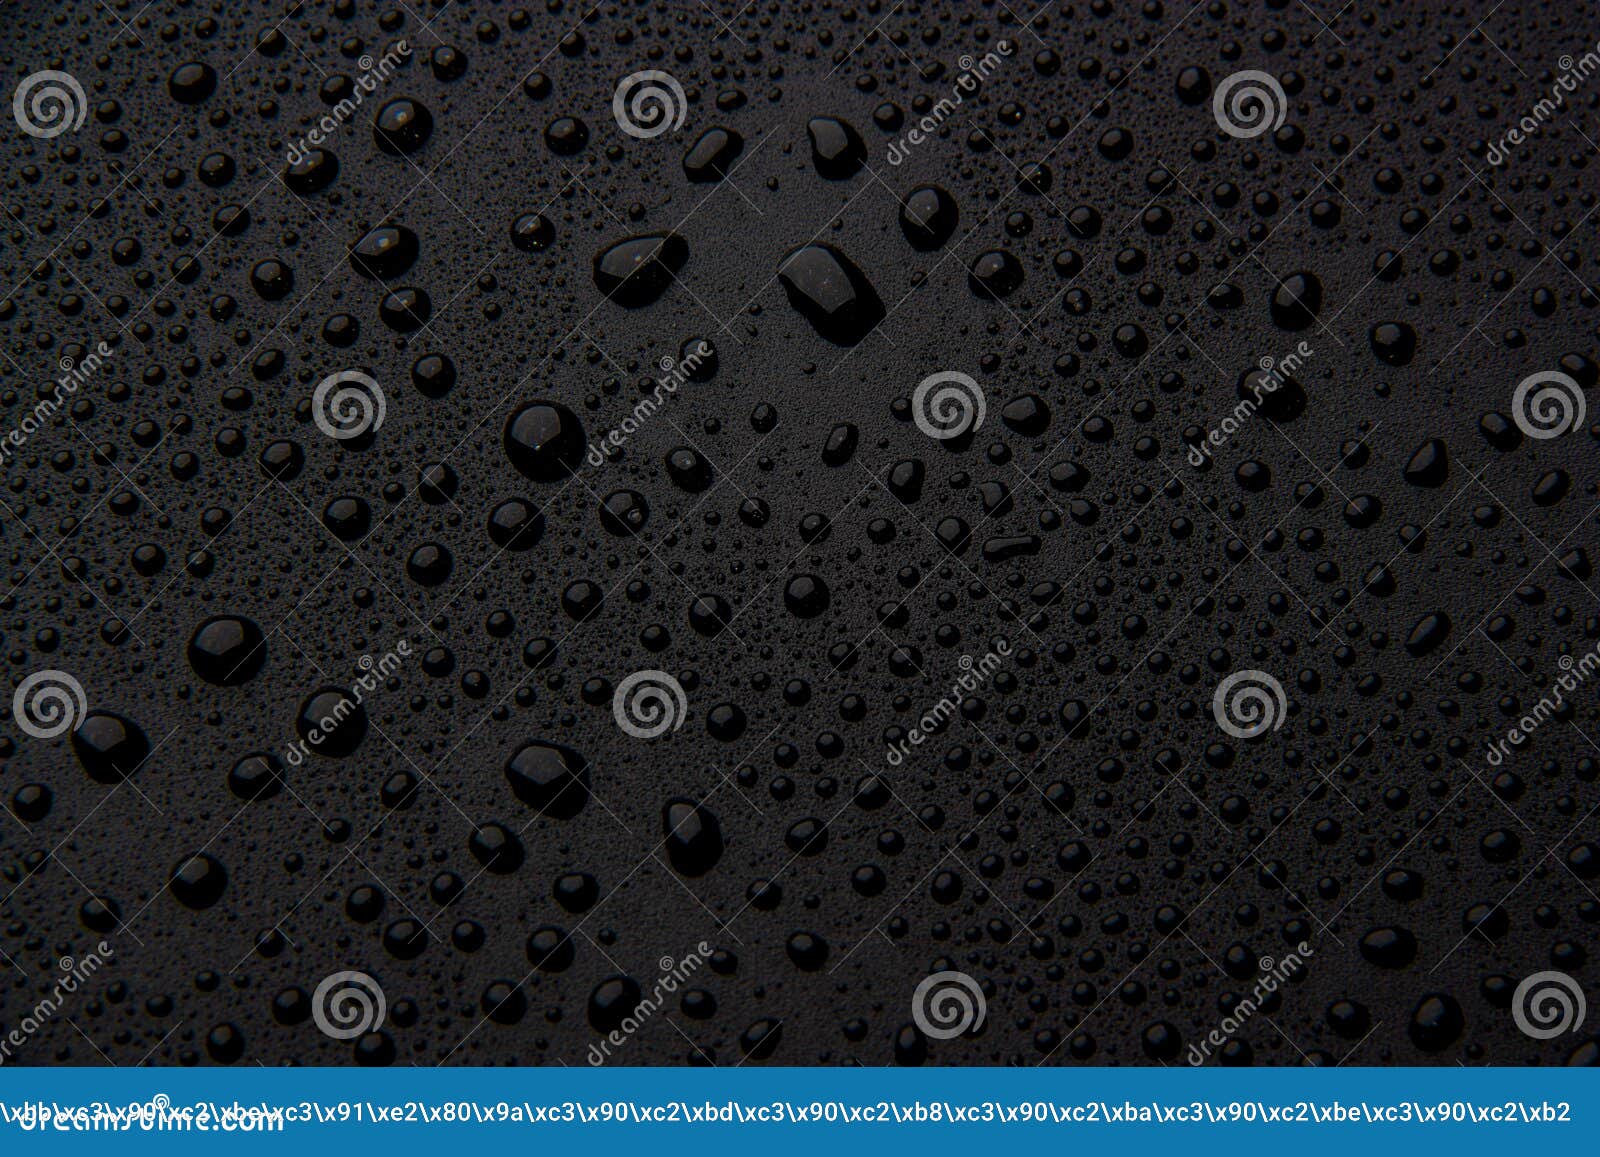 Drops of Water on a Black Background Stock Photo - Image of closeup